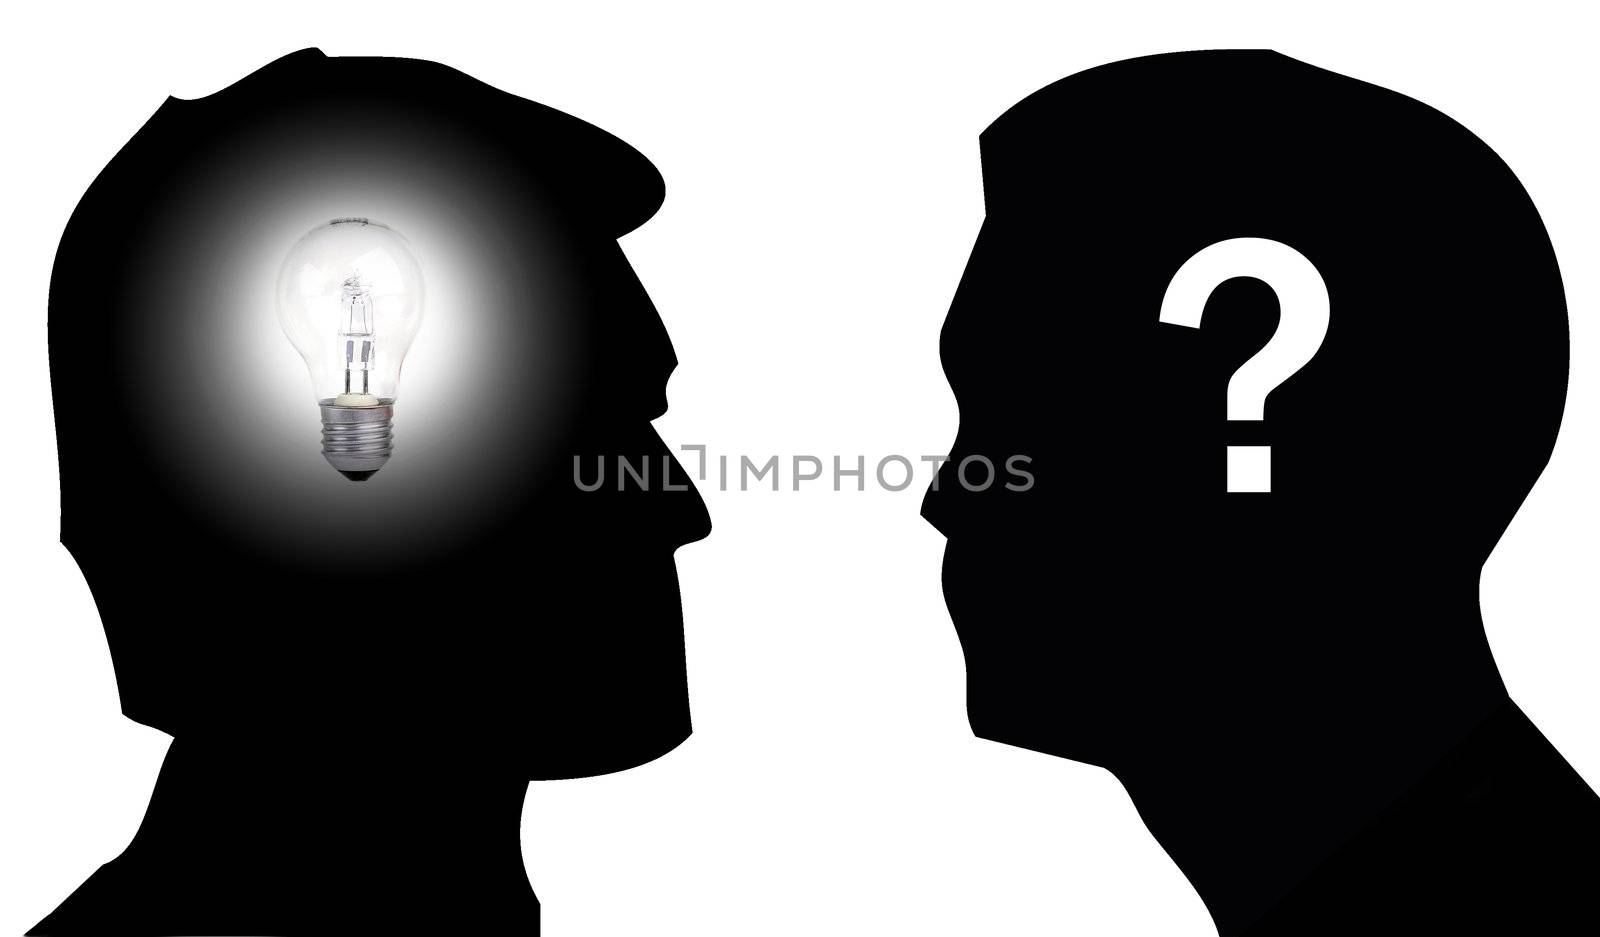 Silhouette of two men, one with a light bulb on his head to illustrate the concept of having an idea and the other with a question mark on his head to illustrate the concept of doubt